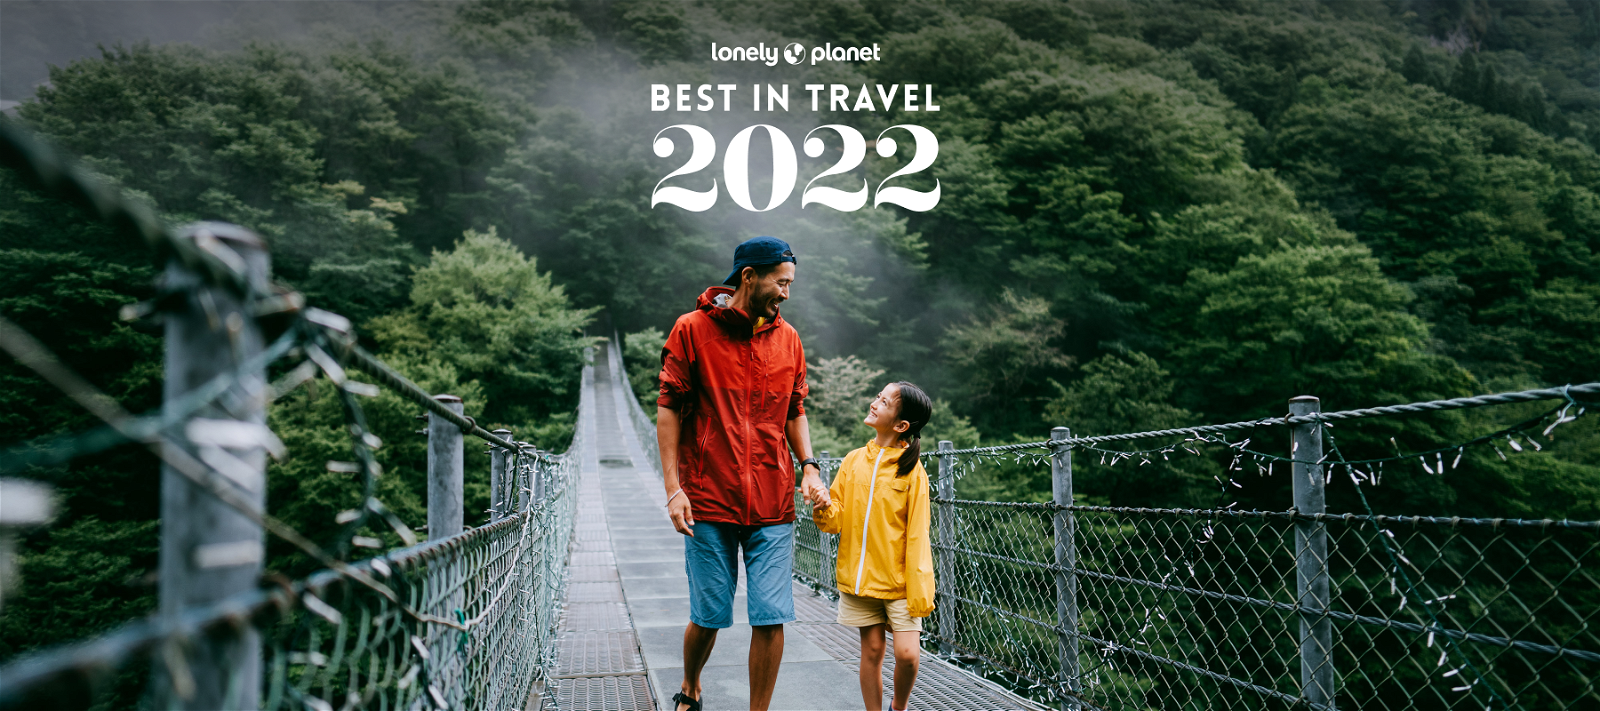 Lonely Planet announces the best destinations for travelers to visit in 2022